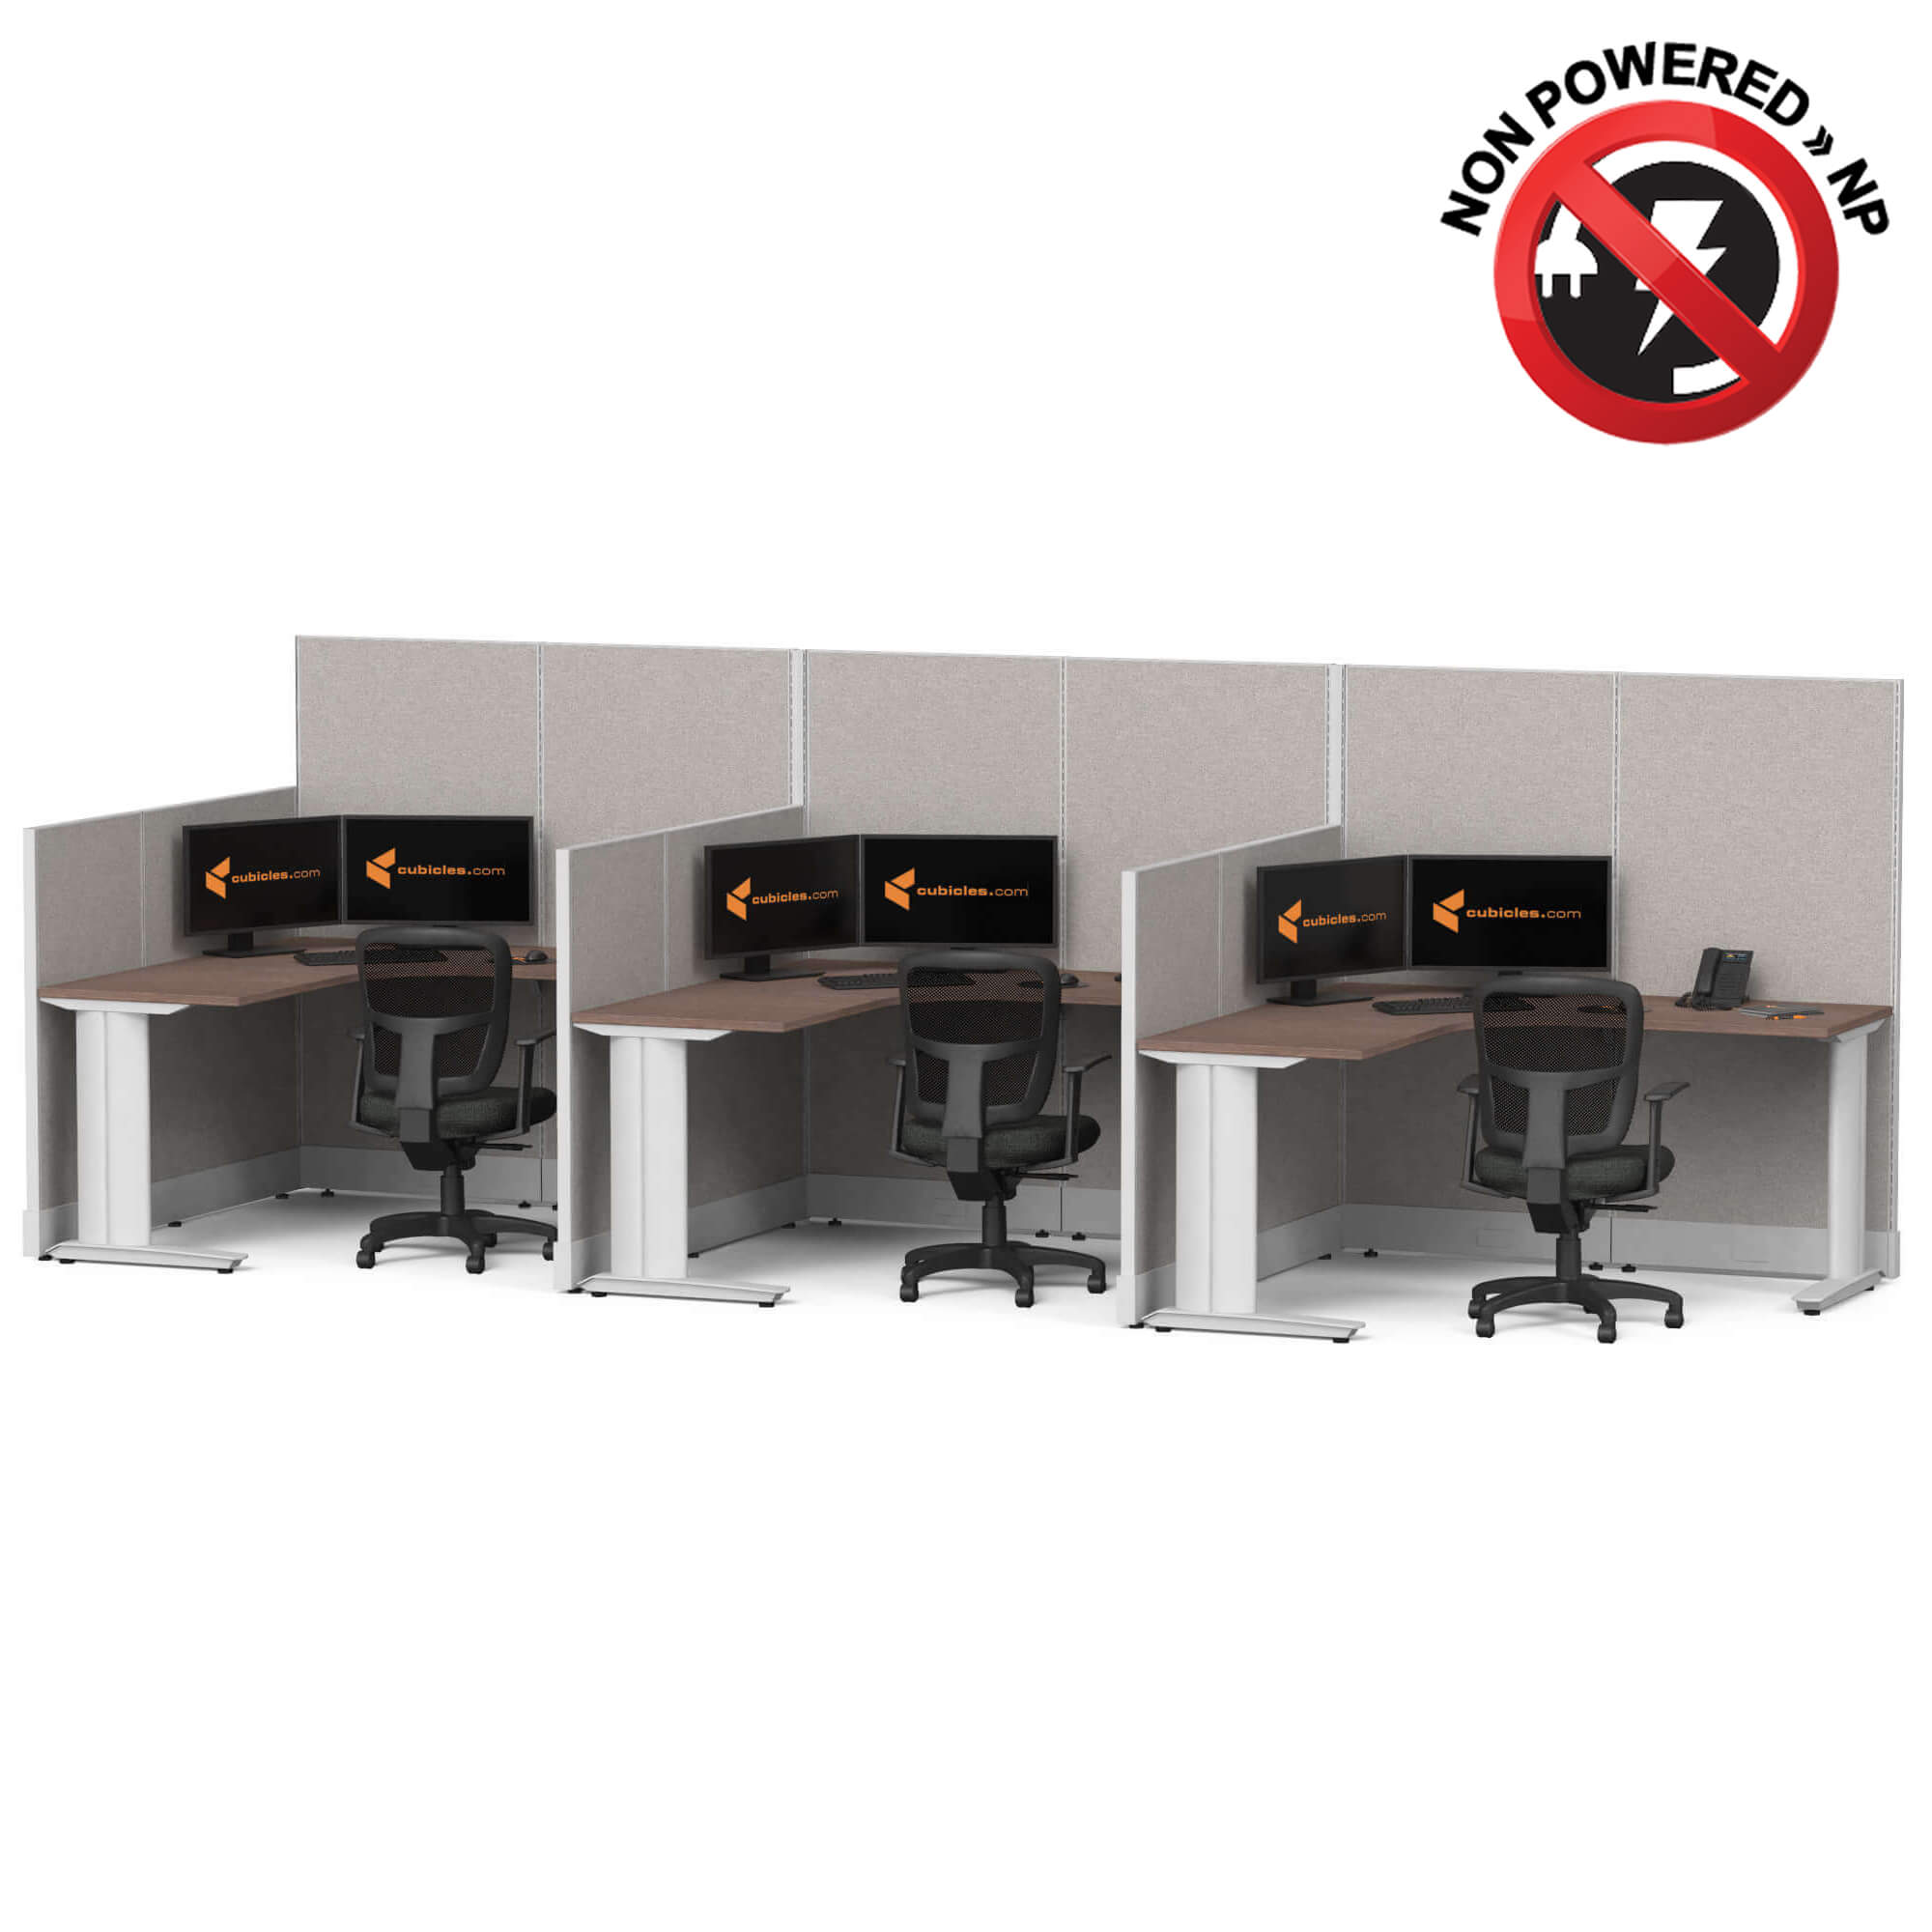 cubicle-desk-l-shaped-3pack-non-powered.jpg